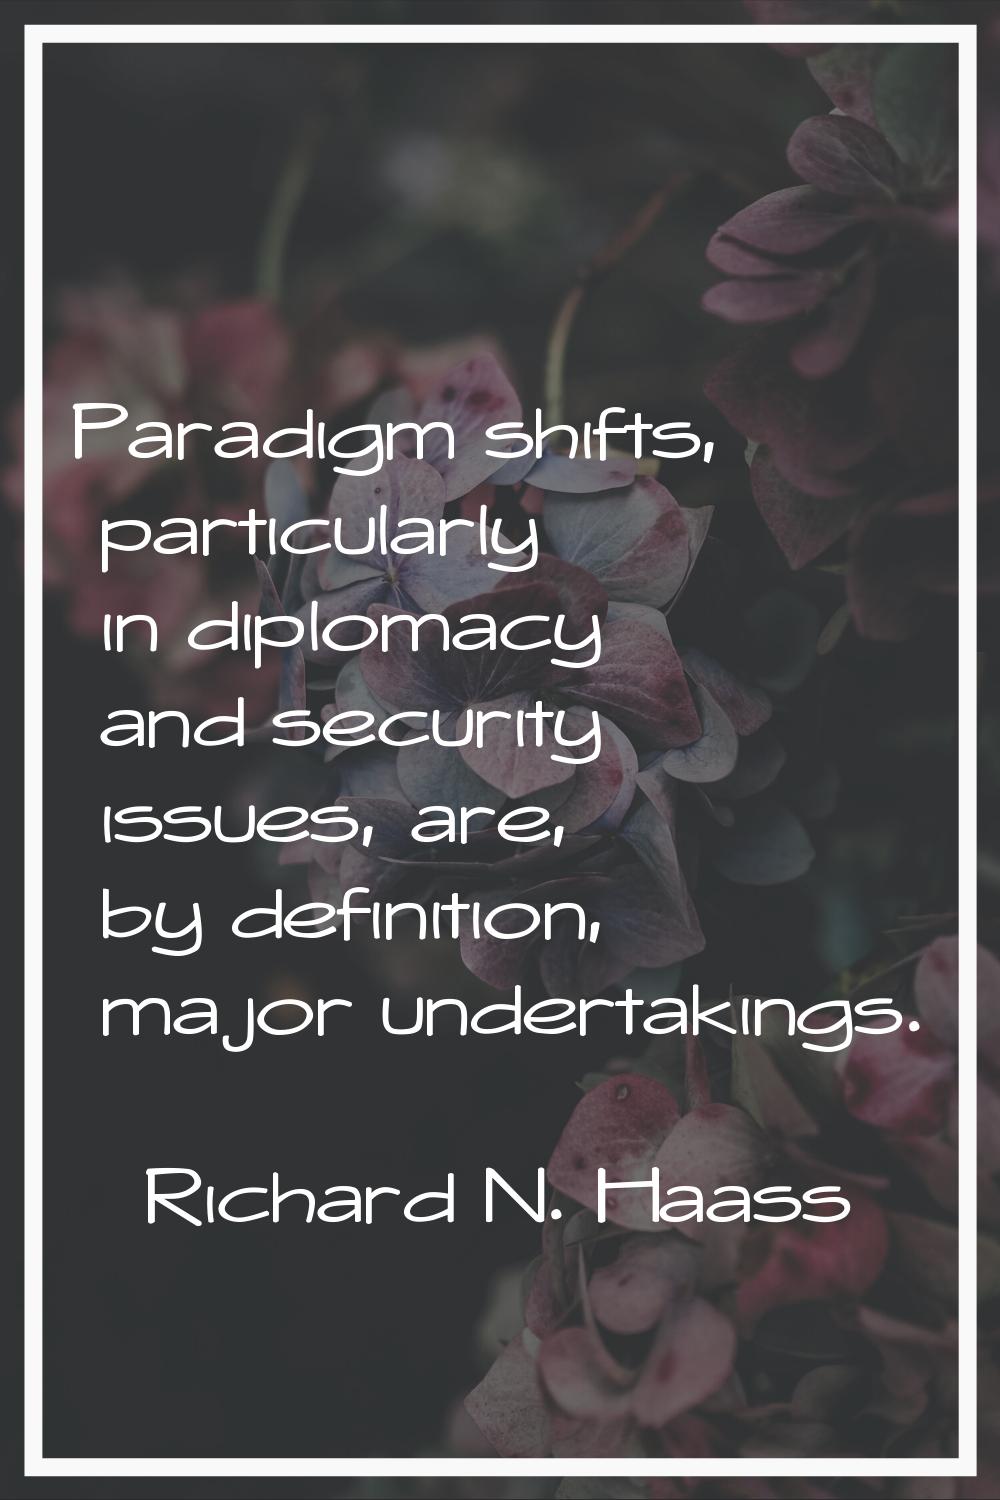 Paradigm shifts, particularly in diplomacy and security issues, are, by definition, major undertaki